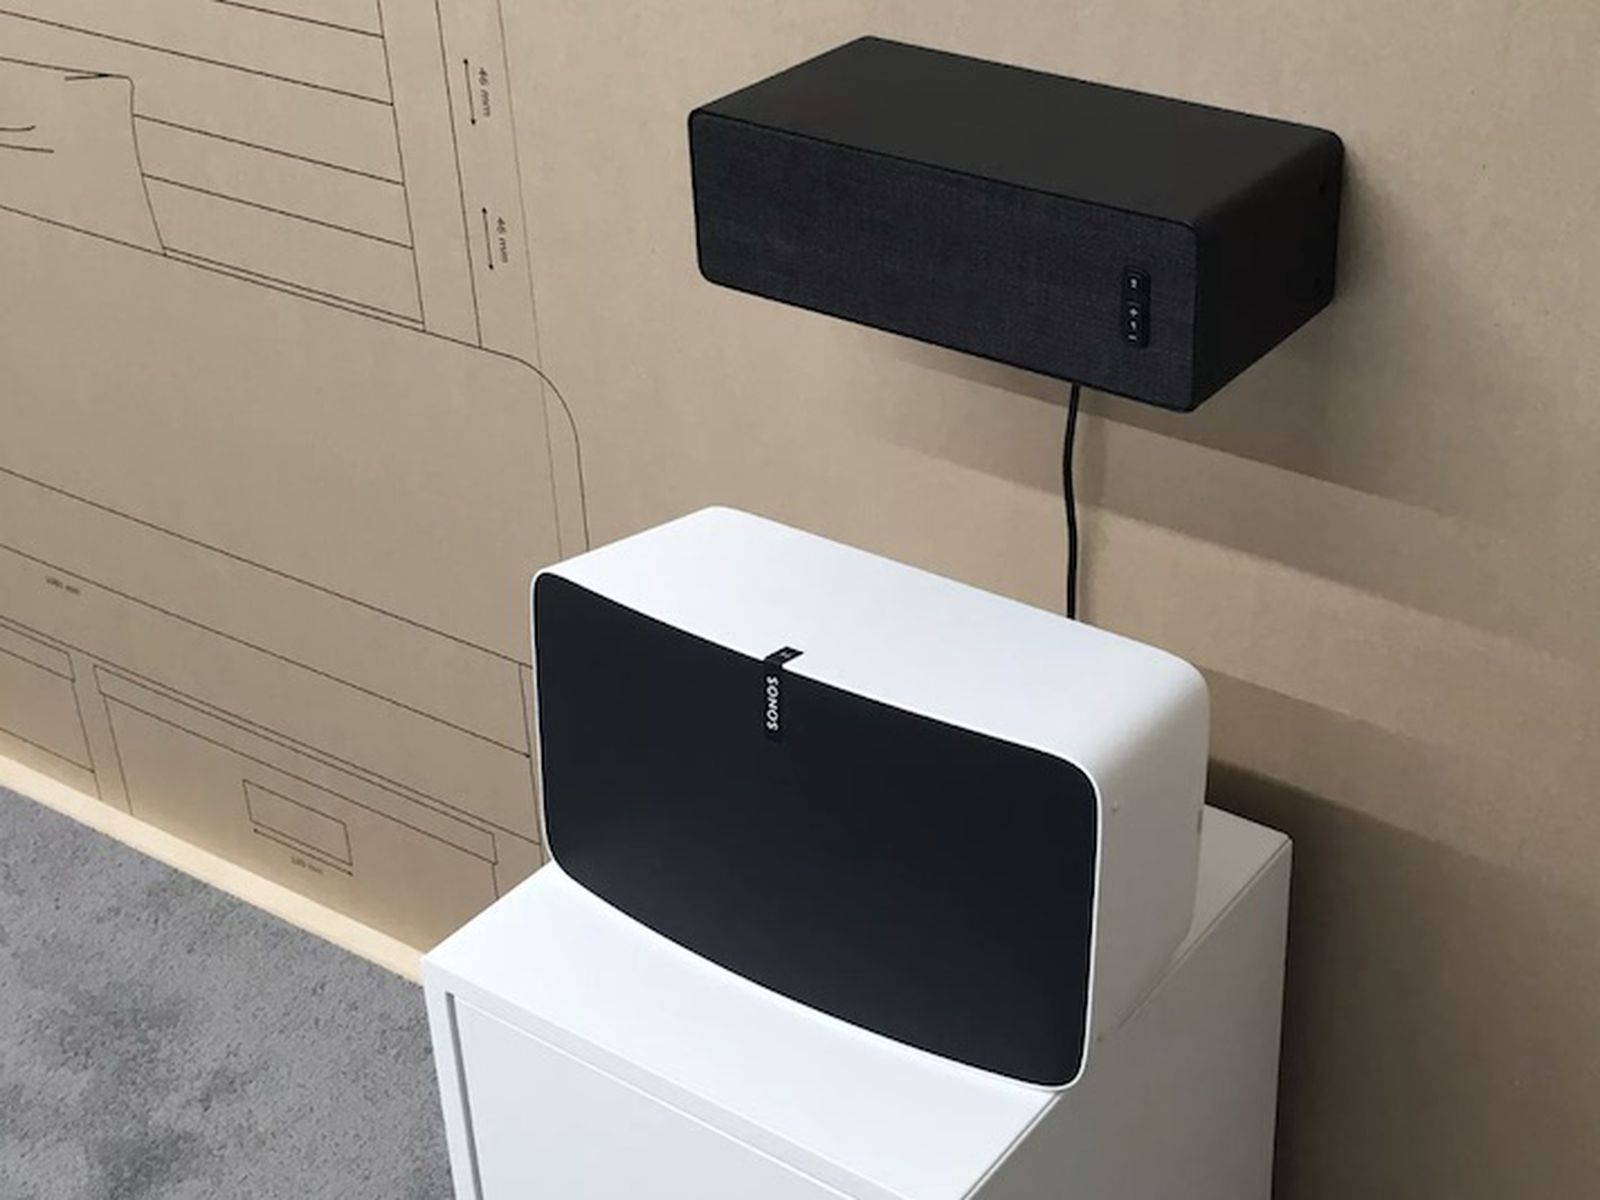 and Reveal Prototypes for 'Symfonisk' Speakers, One That Doubles as a Shelf - MacRumors